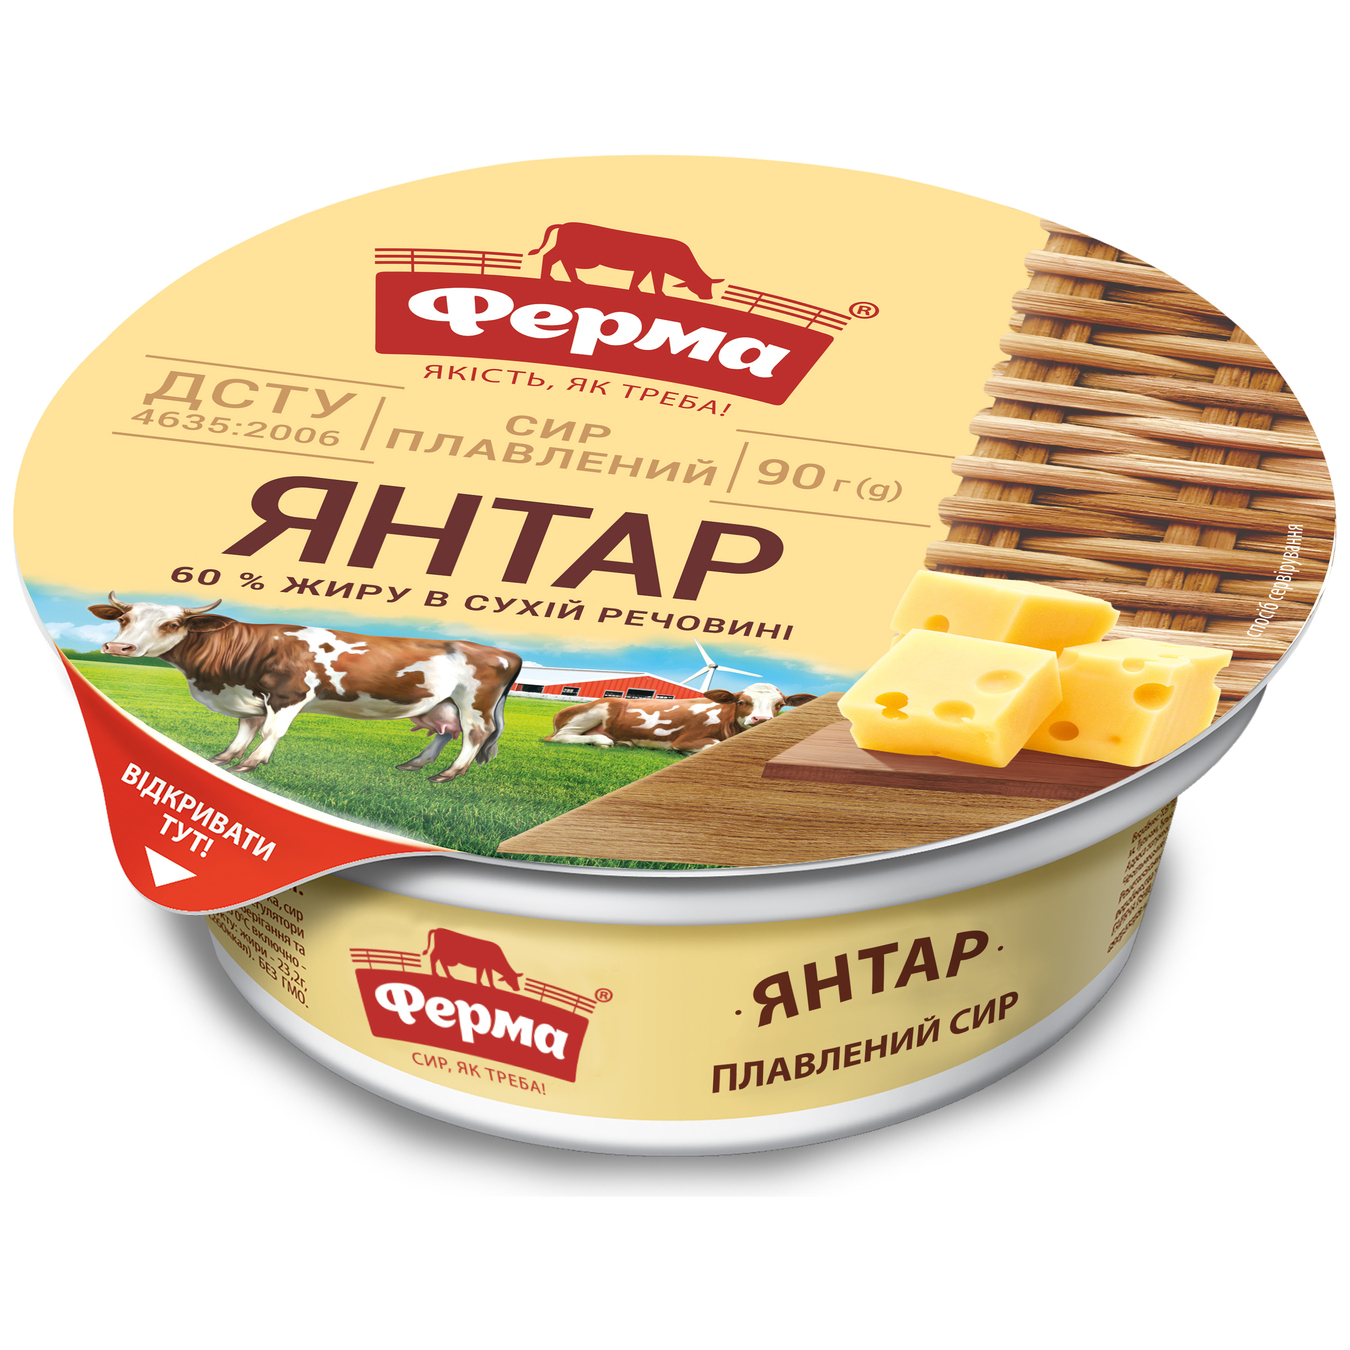 Ferma Amber Processed Cheese 60% 90g